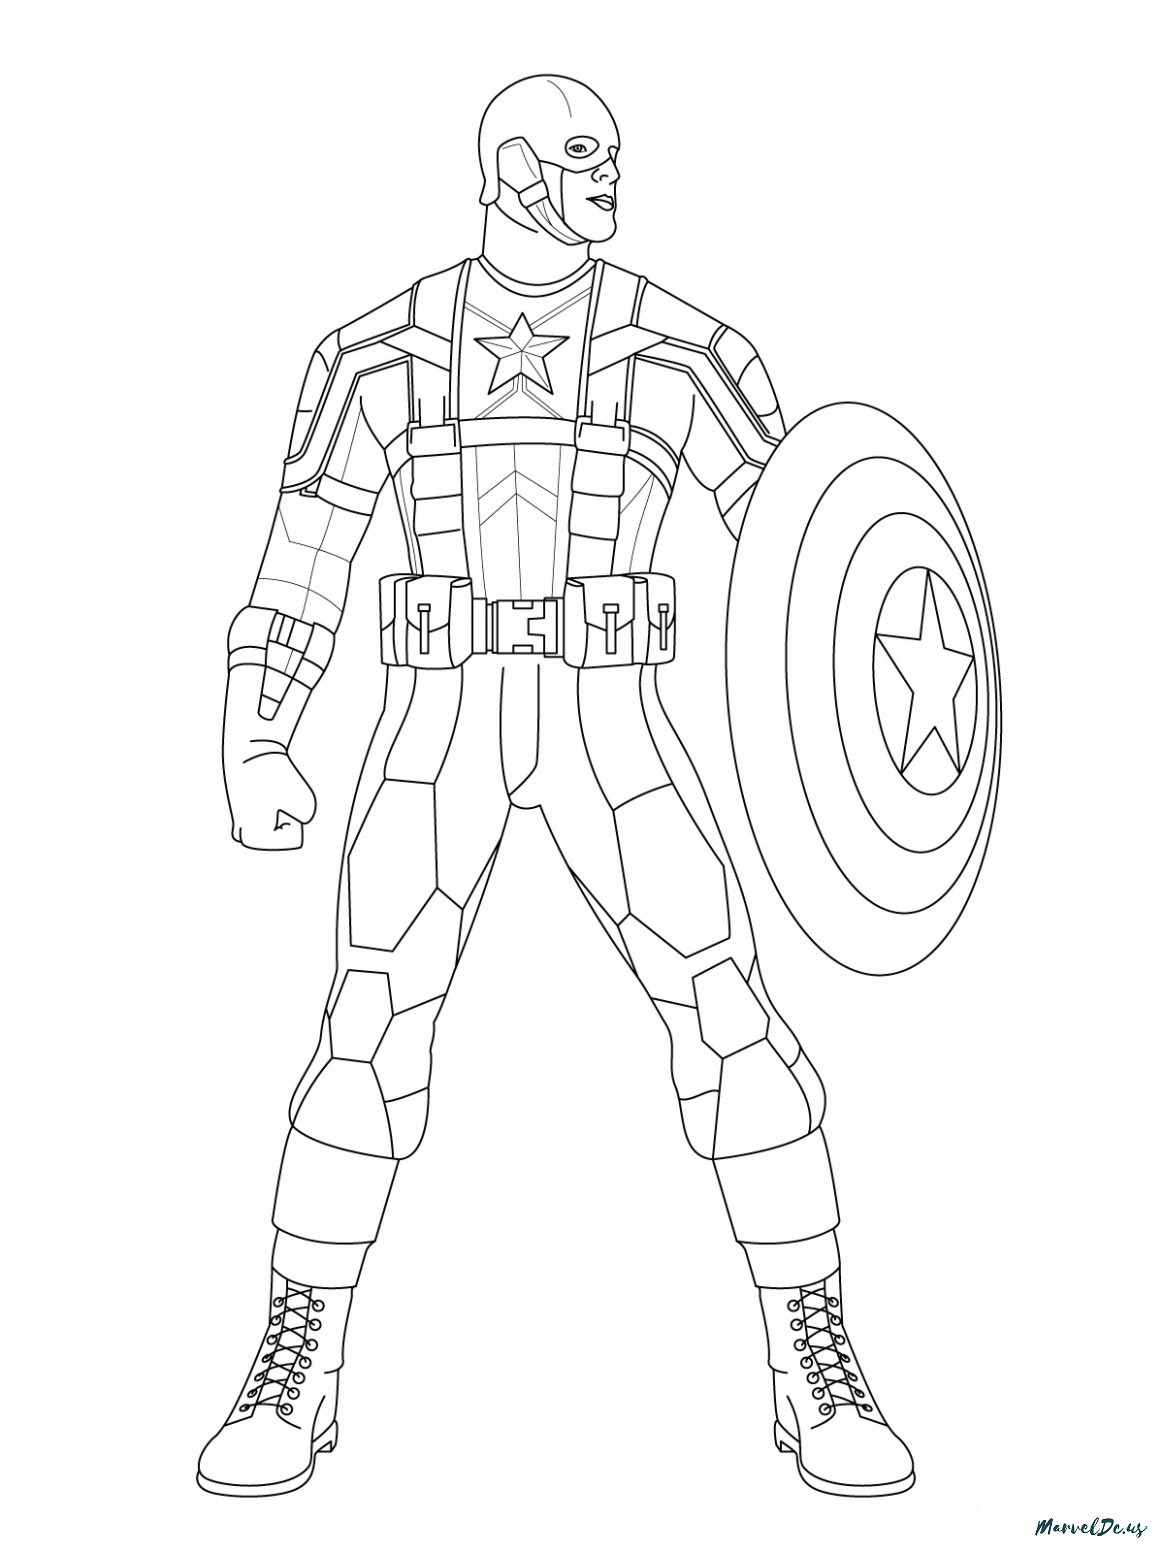 Avengers Infinity War Captain America Coloring Pages   Total ...